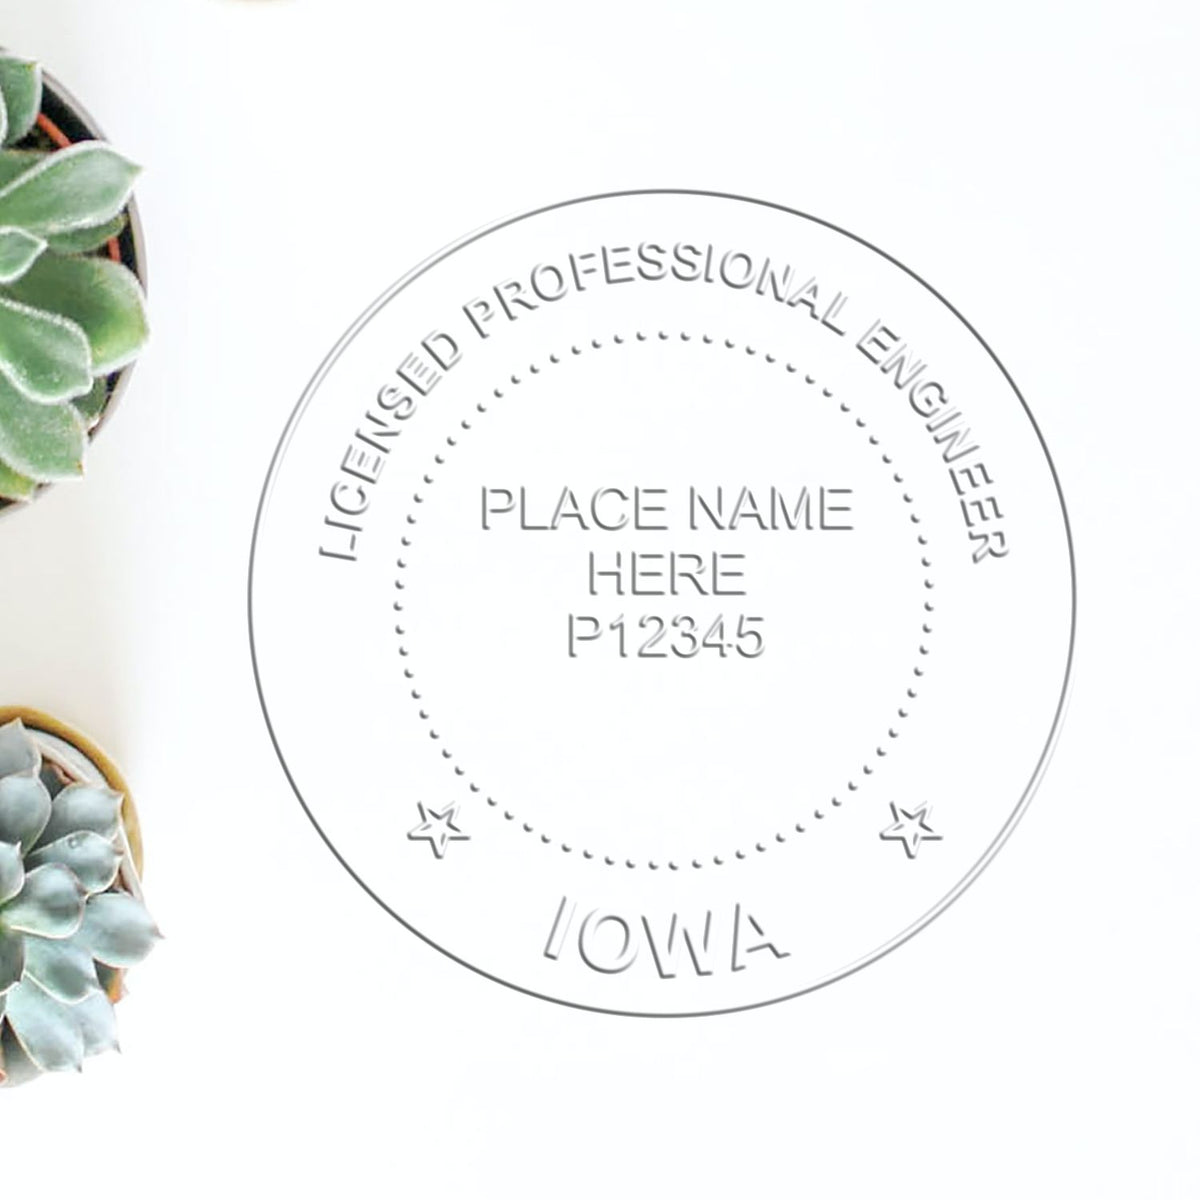 A stamped impression of the Handheld Iowa Professional Engineer Embosser in this stylish lifestyle photo, setting the tone for a unique and personalized product.